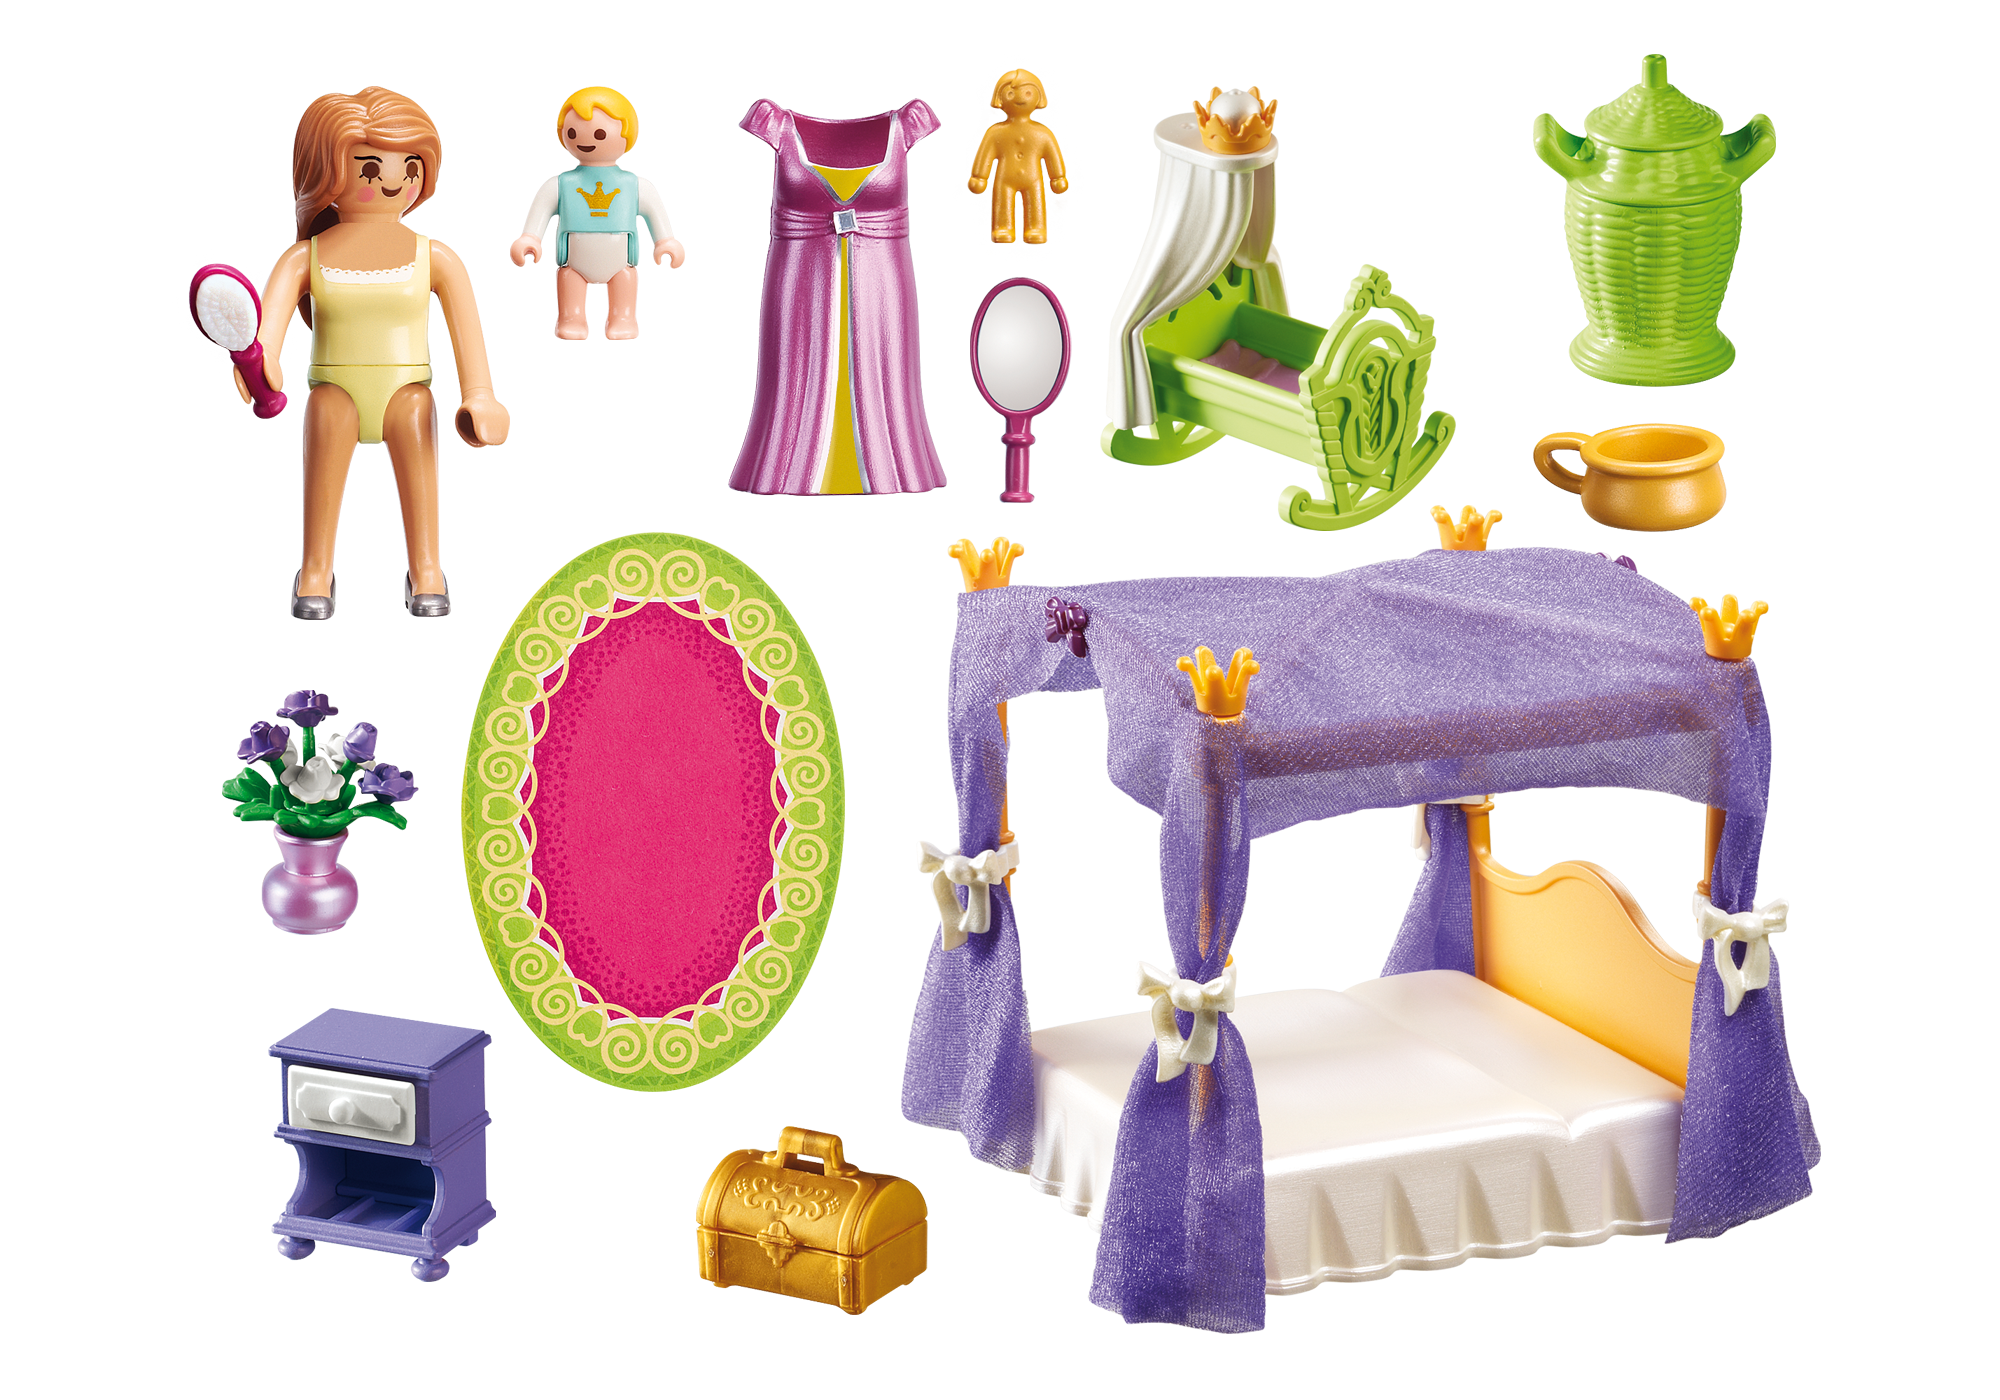 Princess Chamber with Cradle - 6851 